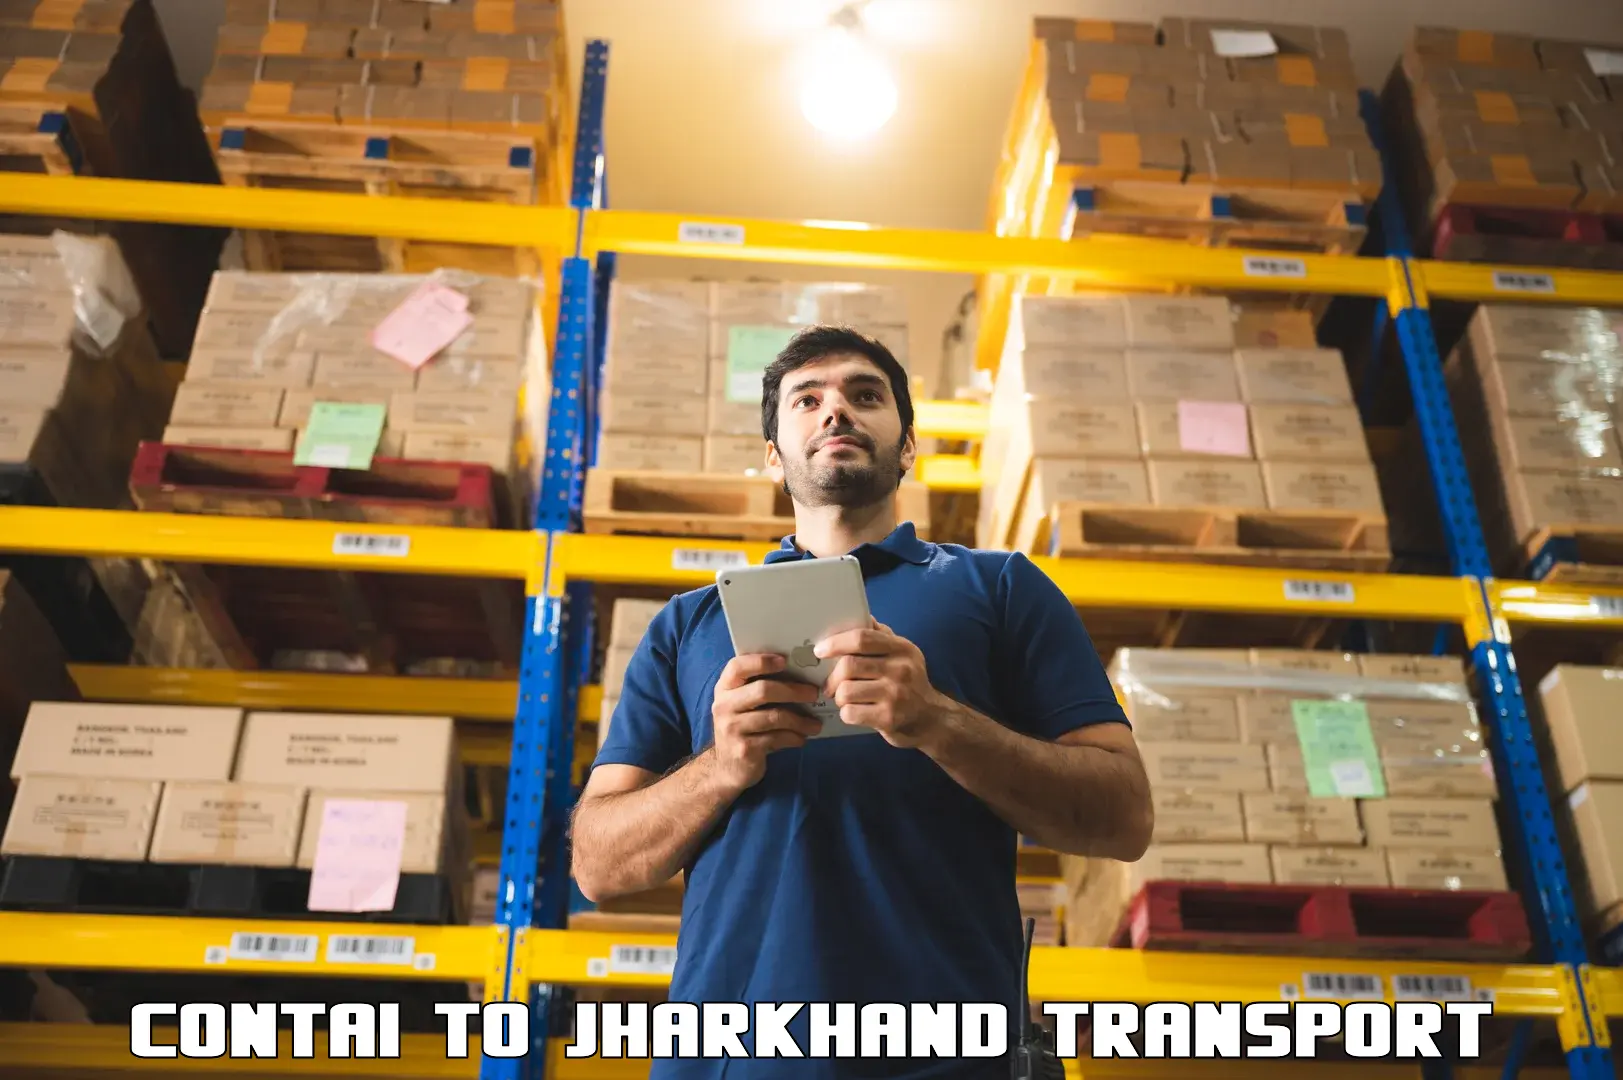 Domestic transport services Contai to Jharkhand